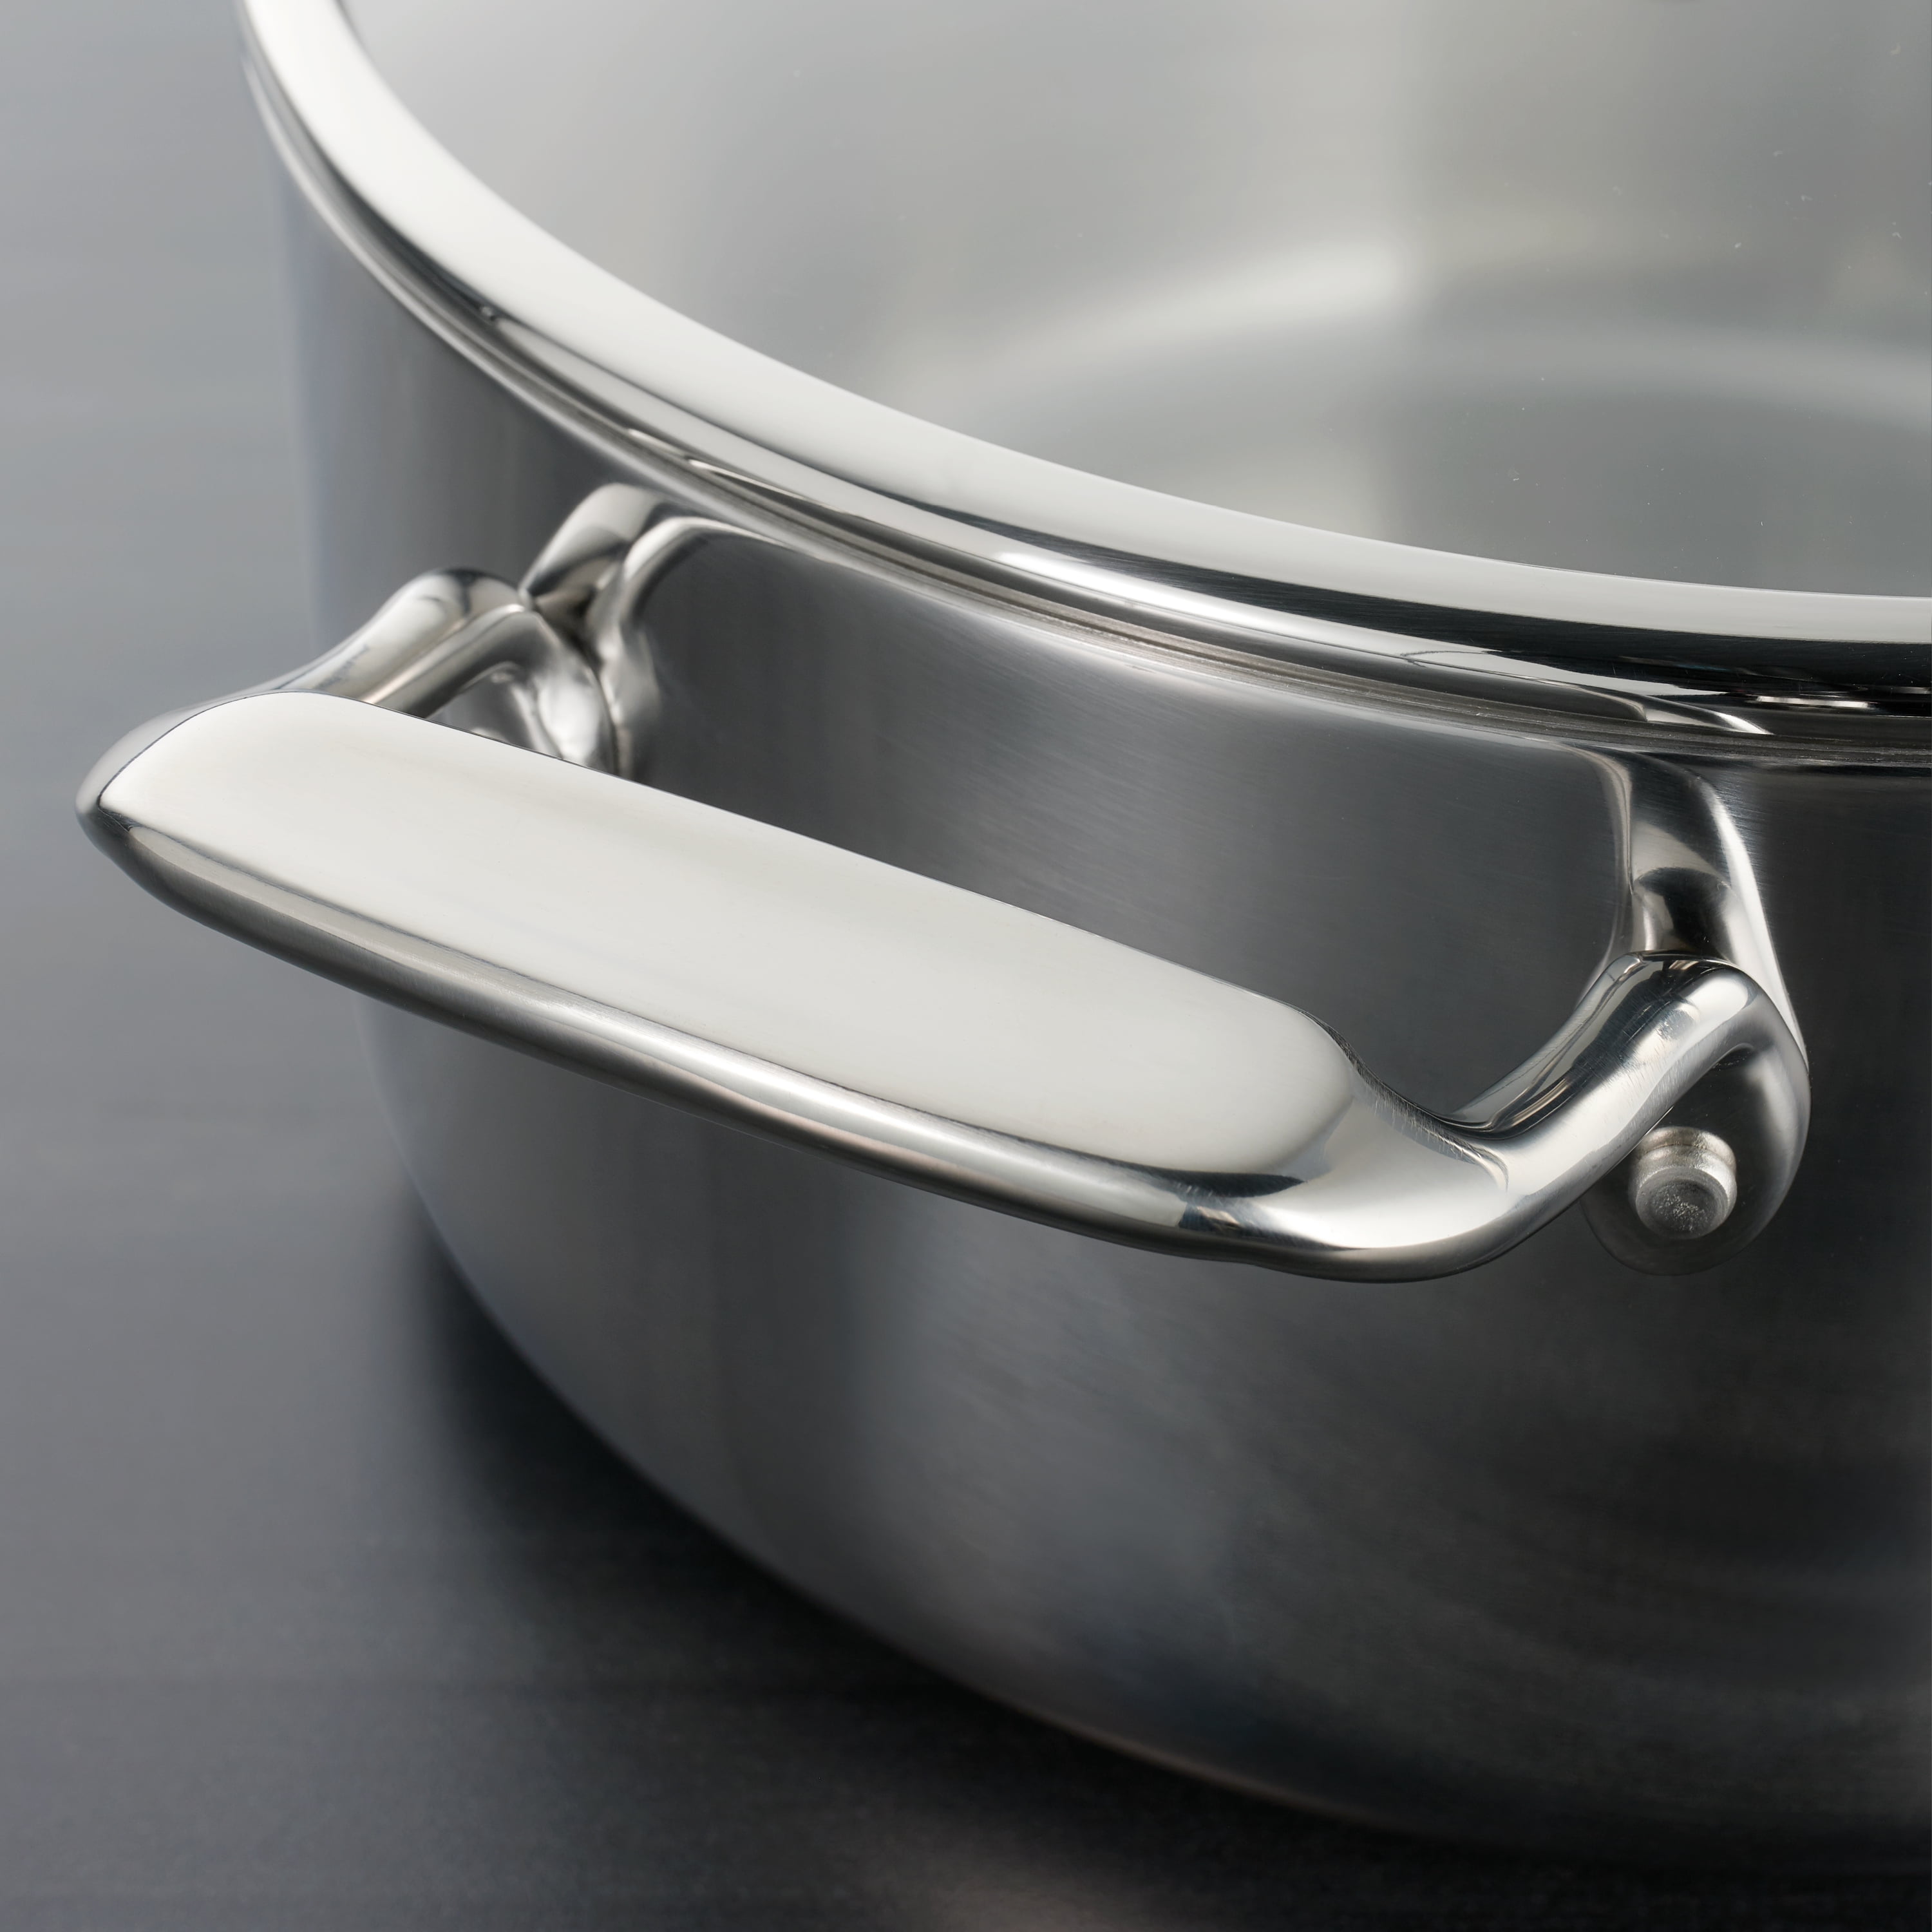 6 Qt Tri-Ply Clad Stainless Steel Covered Sauce Pot - Tramontina US